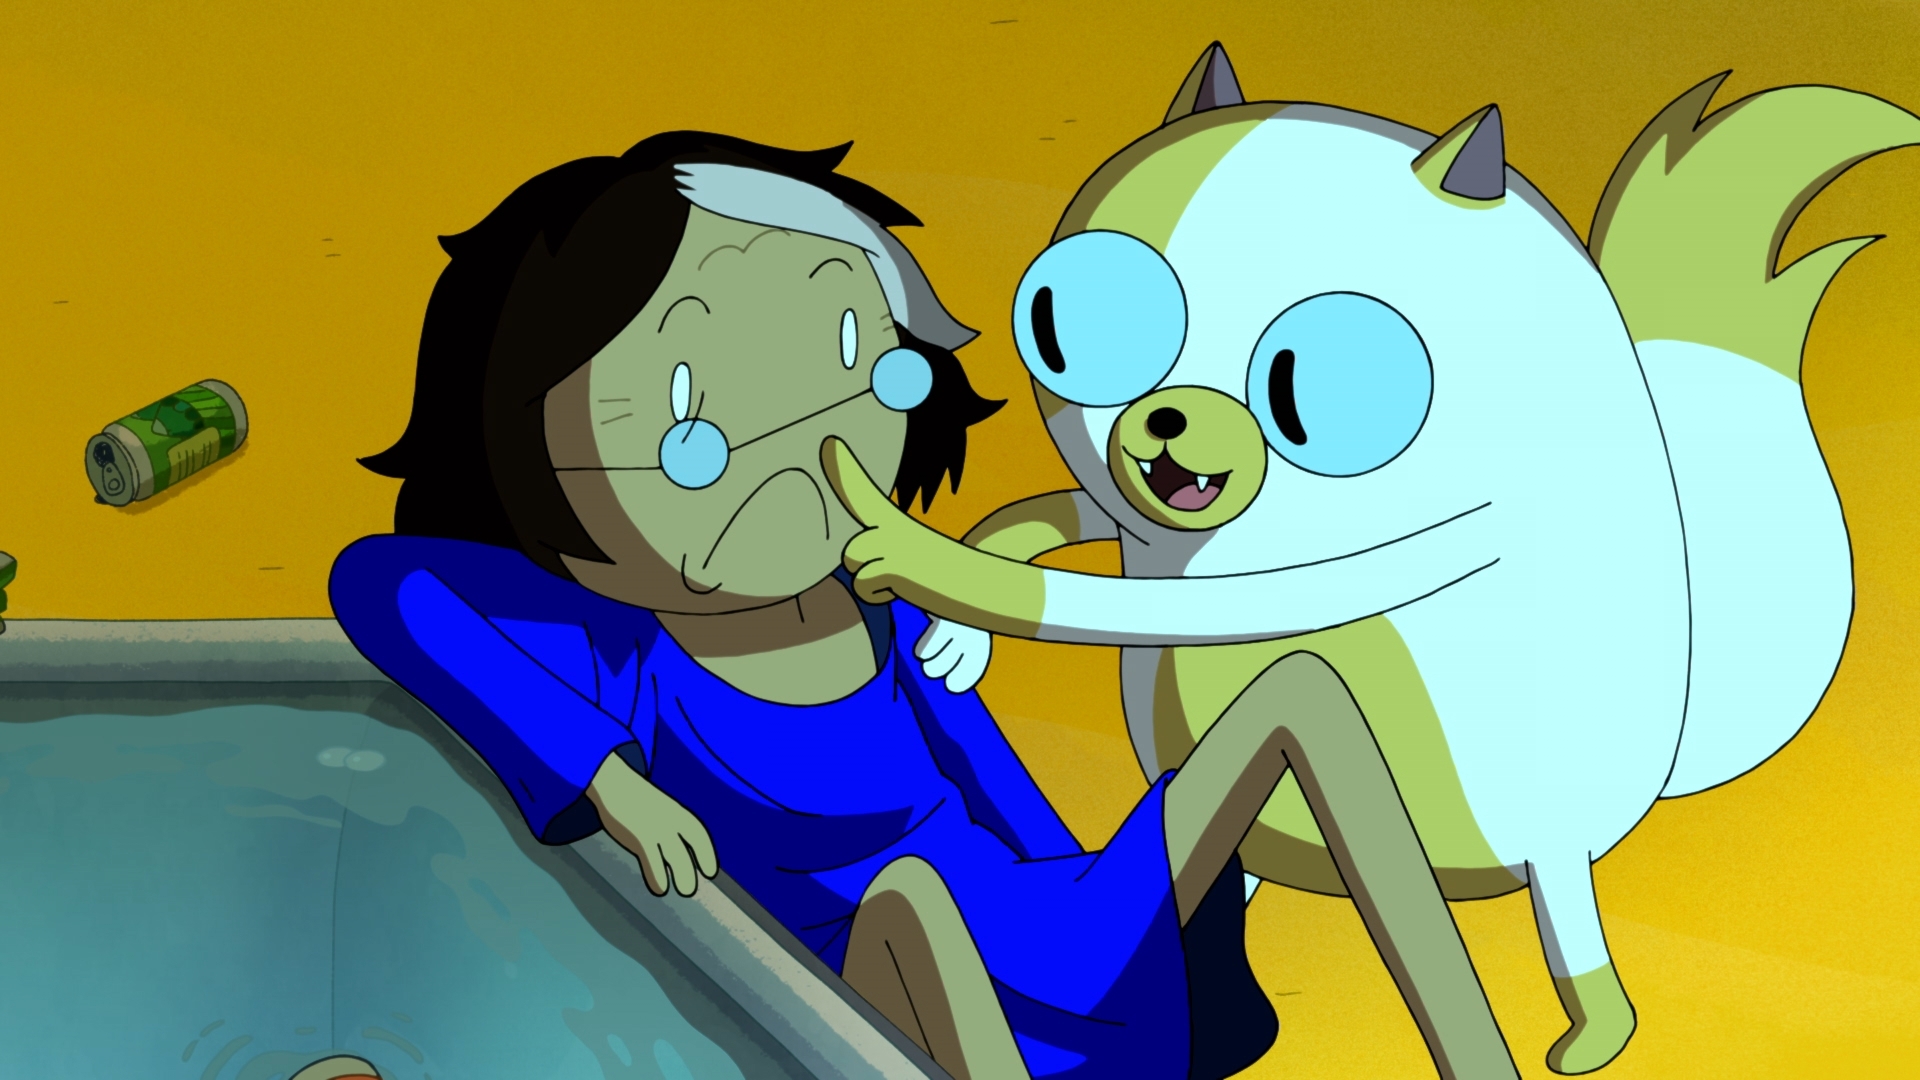 Tom Kenny as Simon Petrikov and Roz Ryan as Cake the Cat in Adam Muto's action-adventure sci-fi fantasy comedy animated series, Adventure Time Fionna and Cake Episode 4